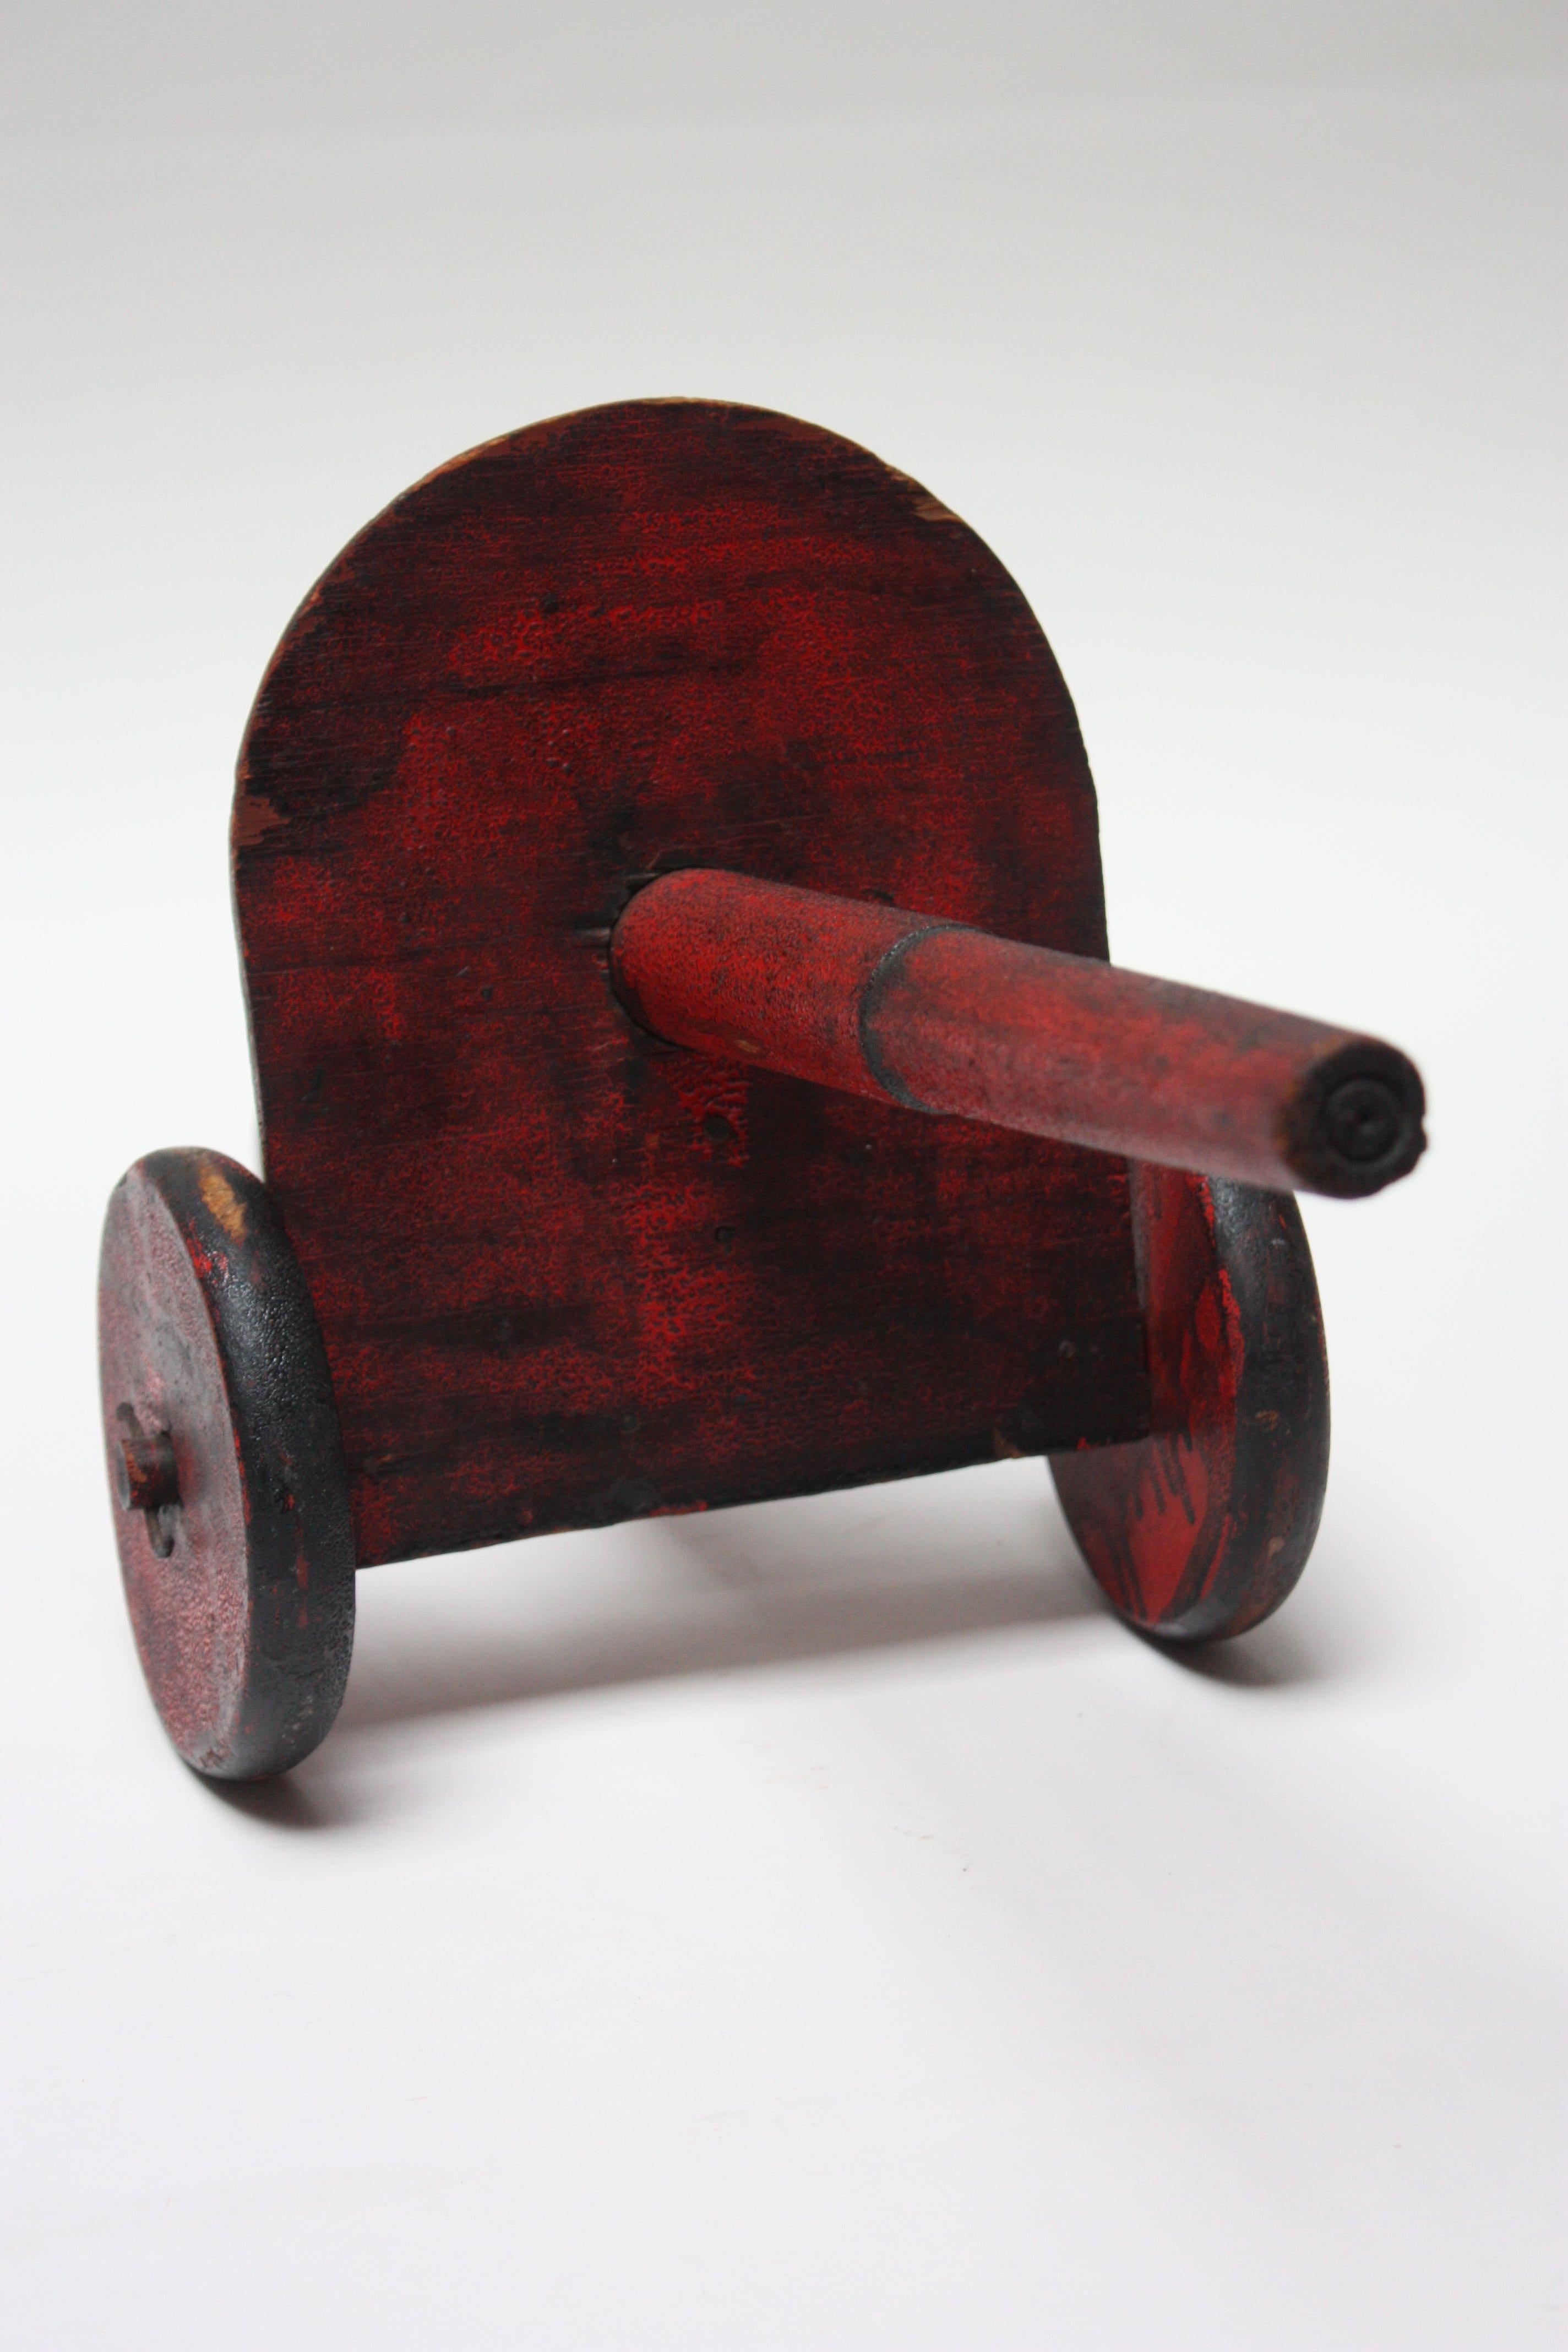 Wood Folk Art Hand Painted Cannon For Sale